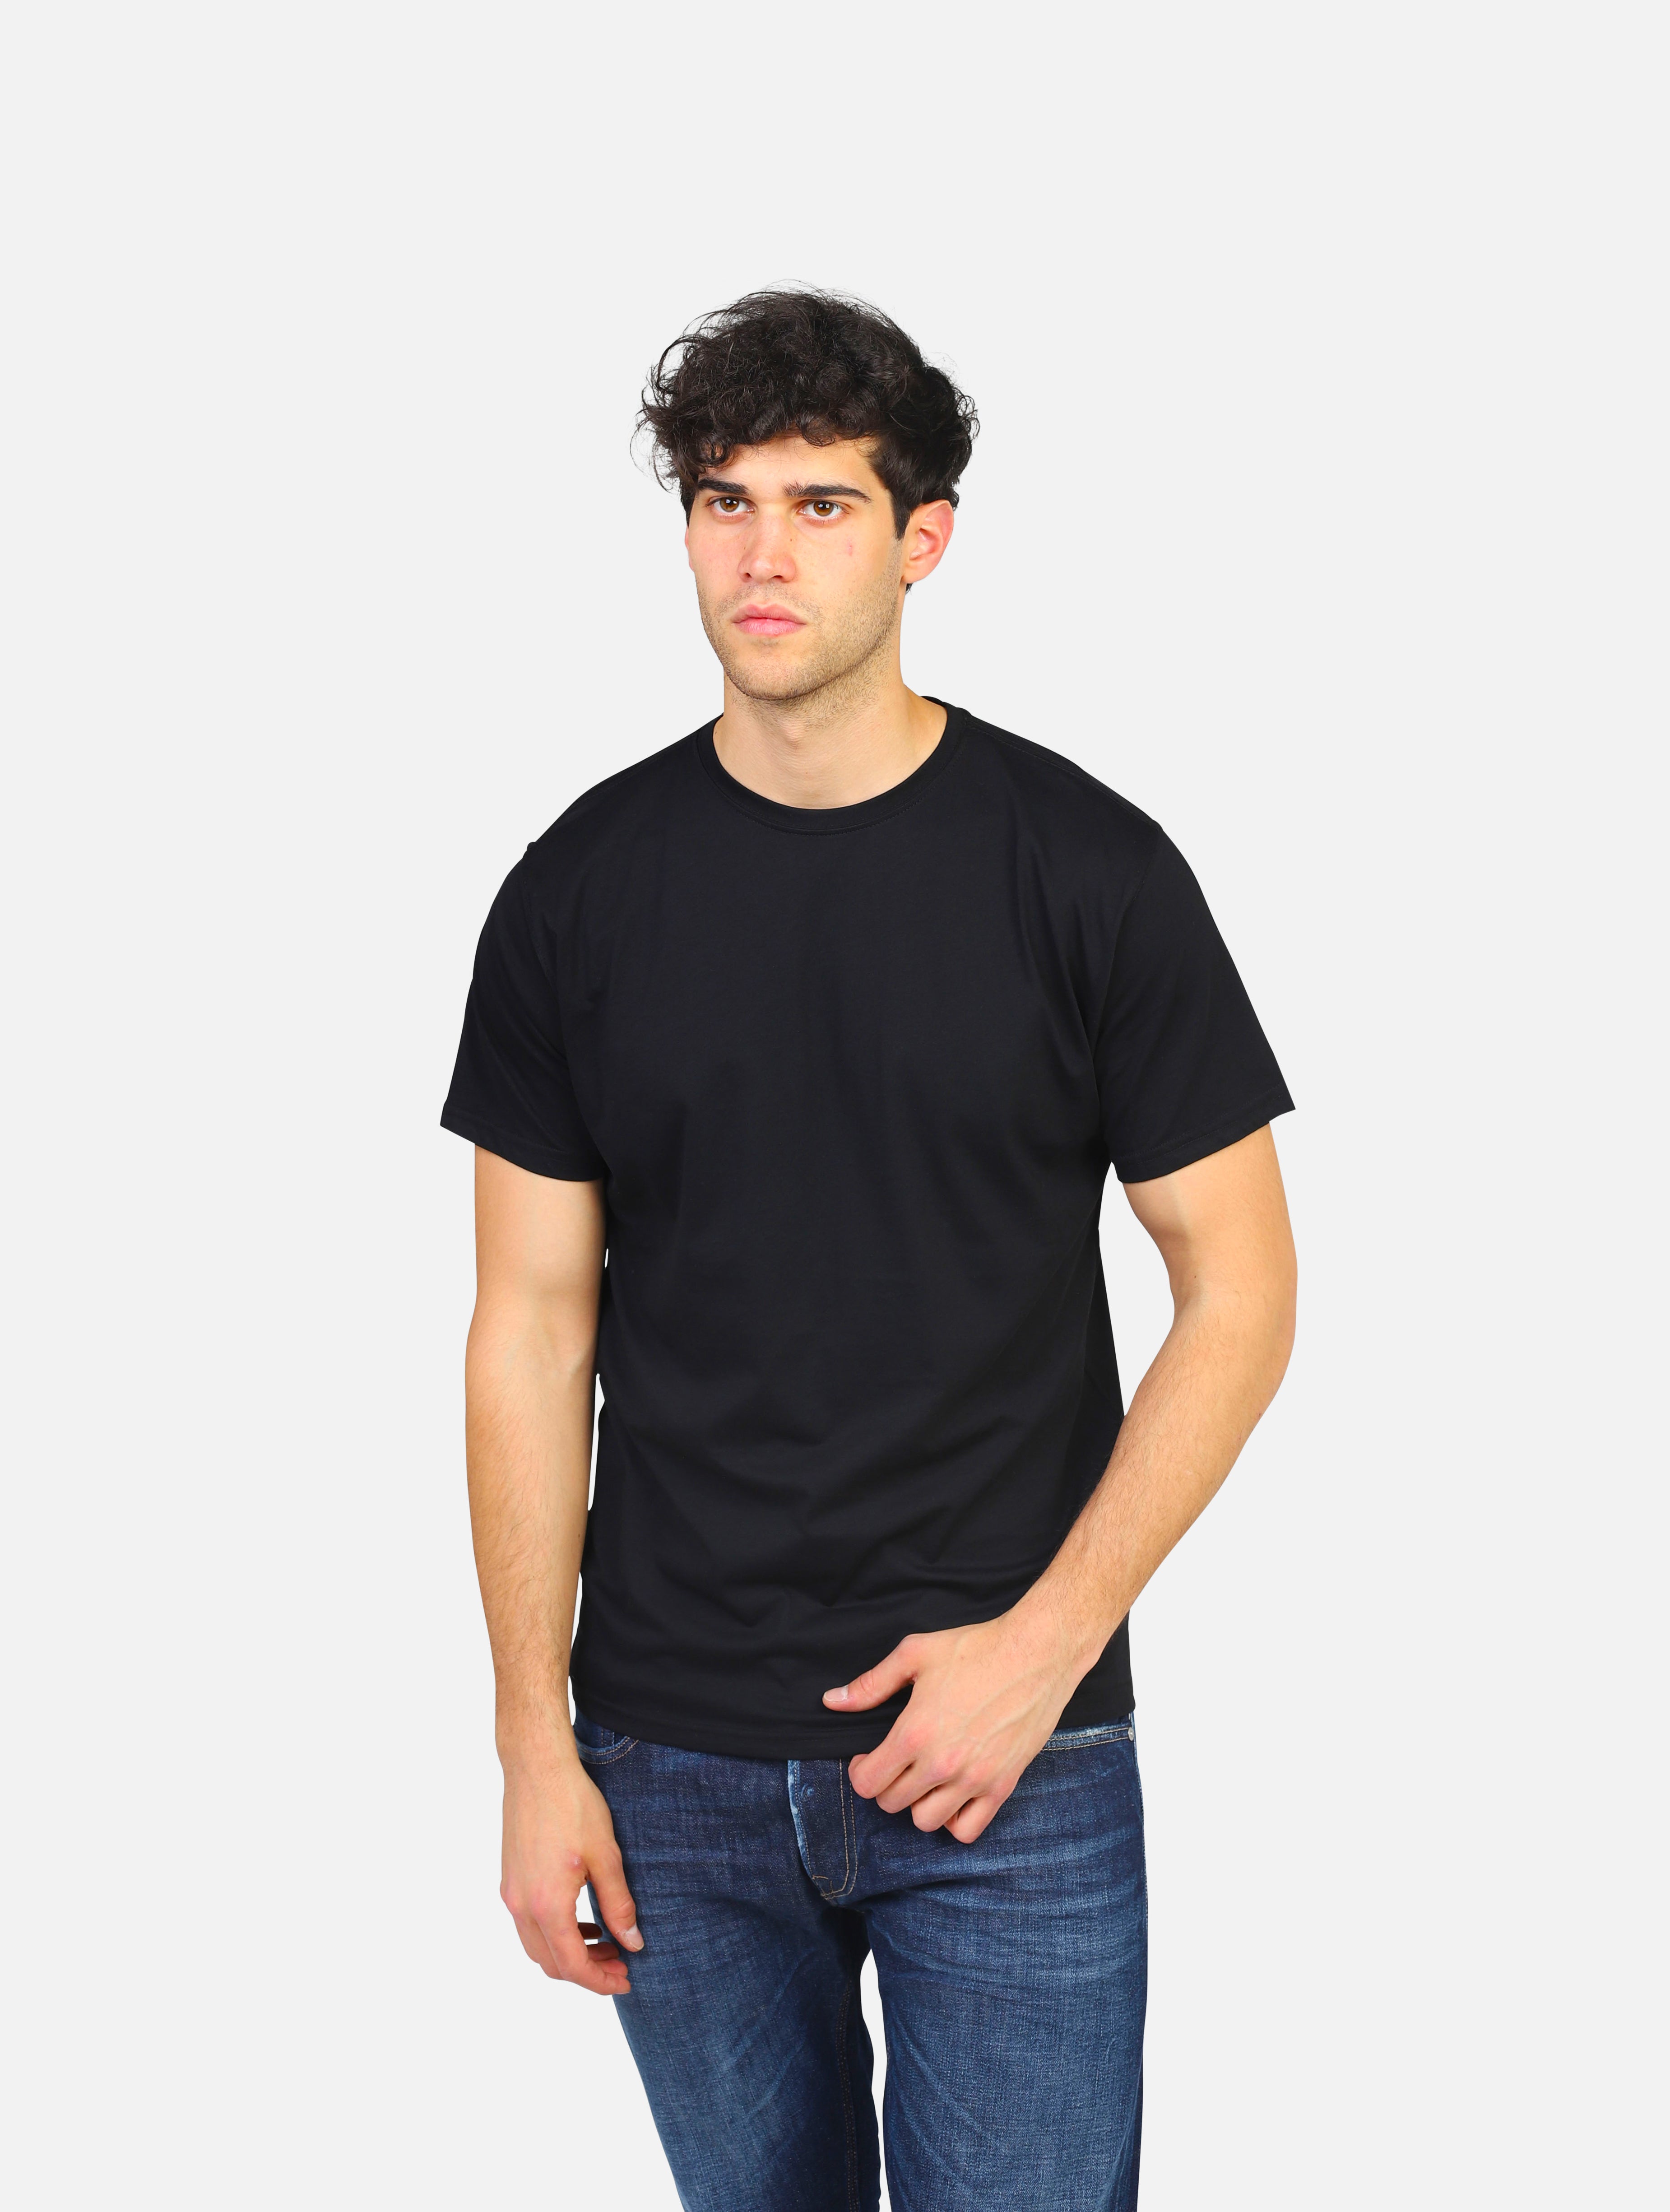 T-shirt outfit -  black uomo 